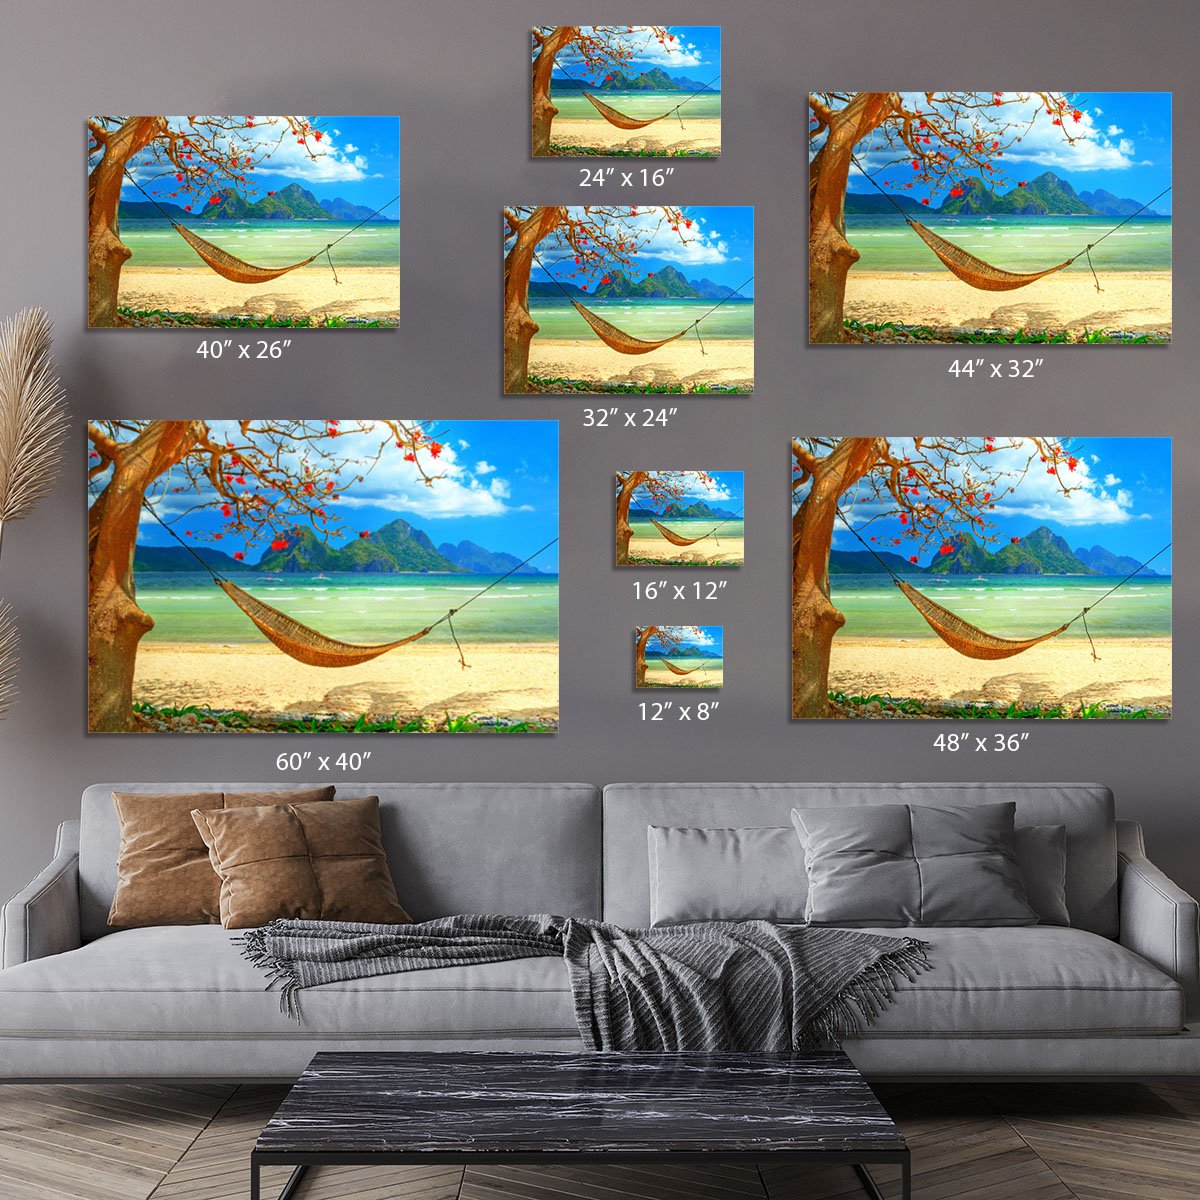 tropical beach scene with hammock Canvas Print or Poster